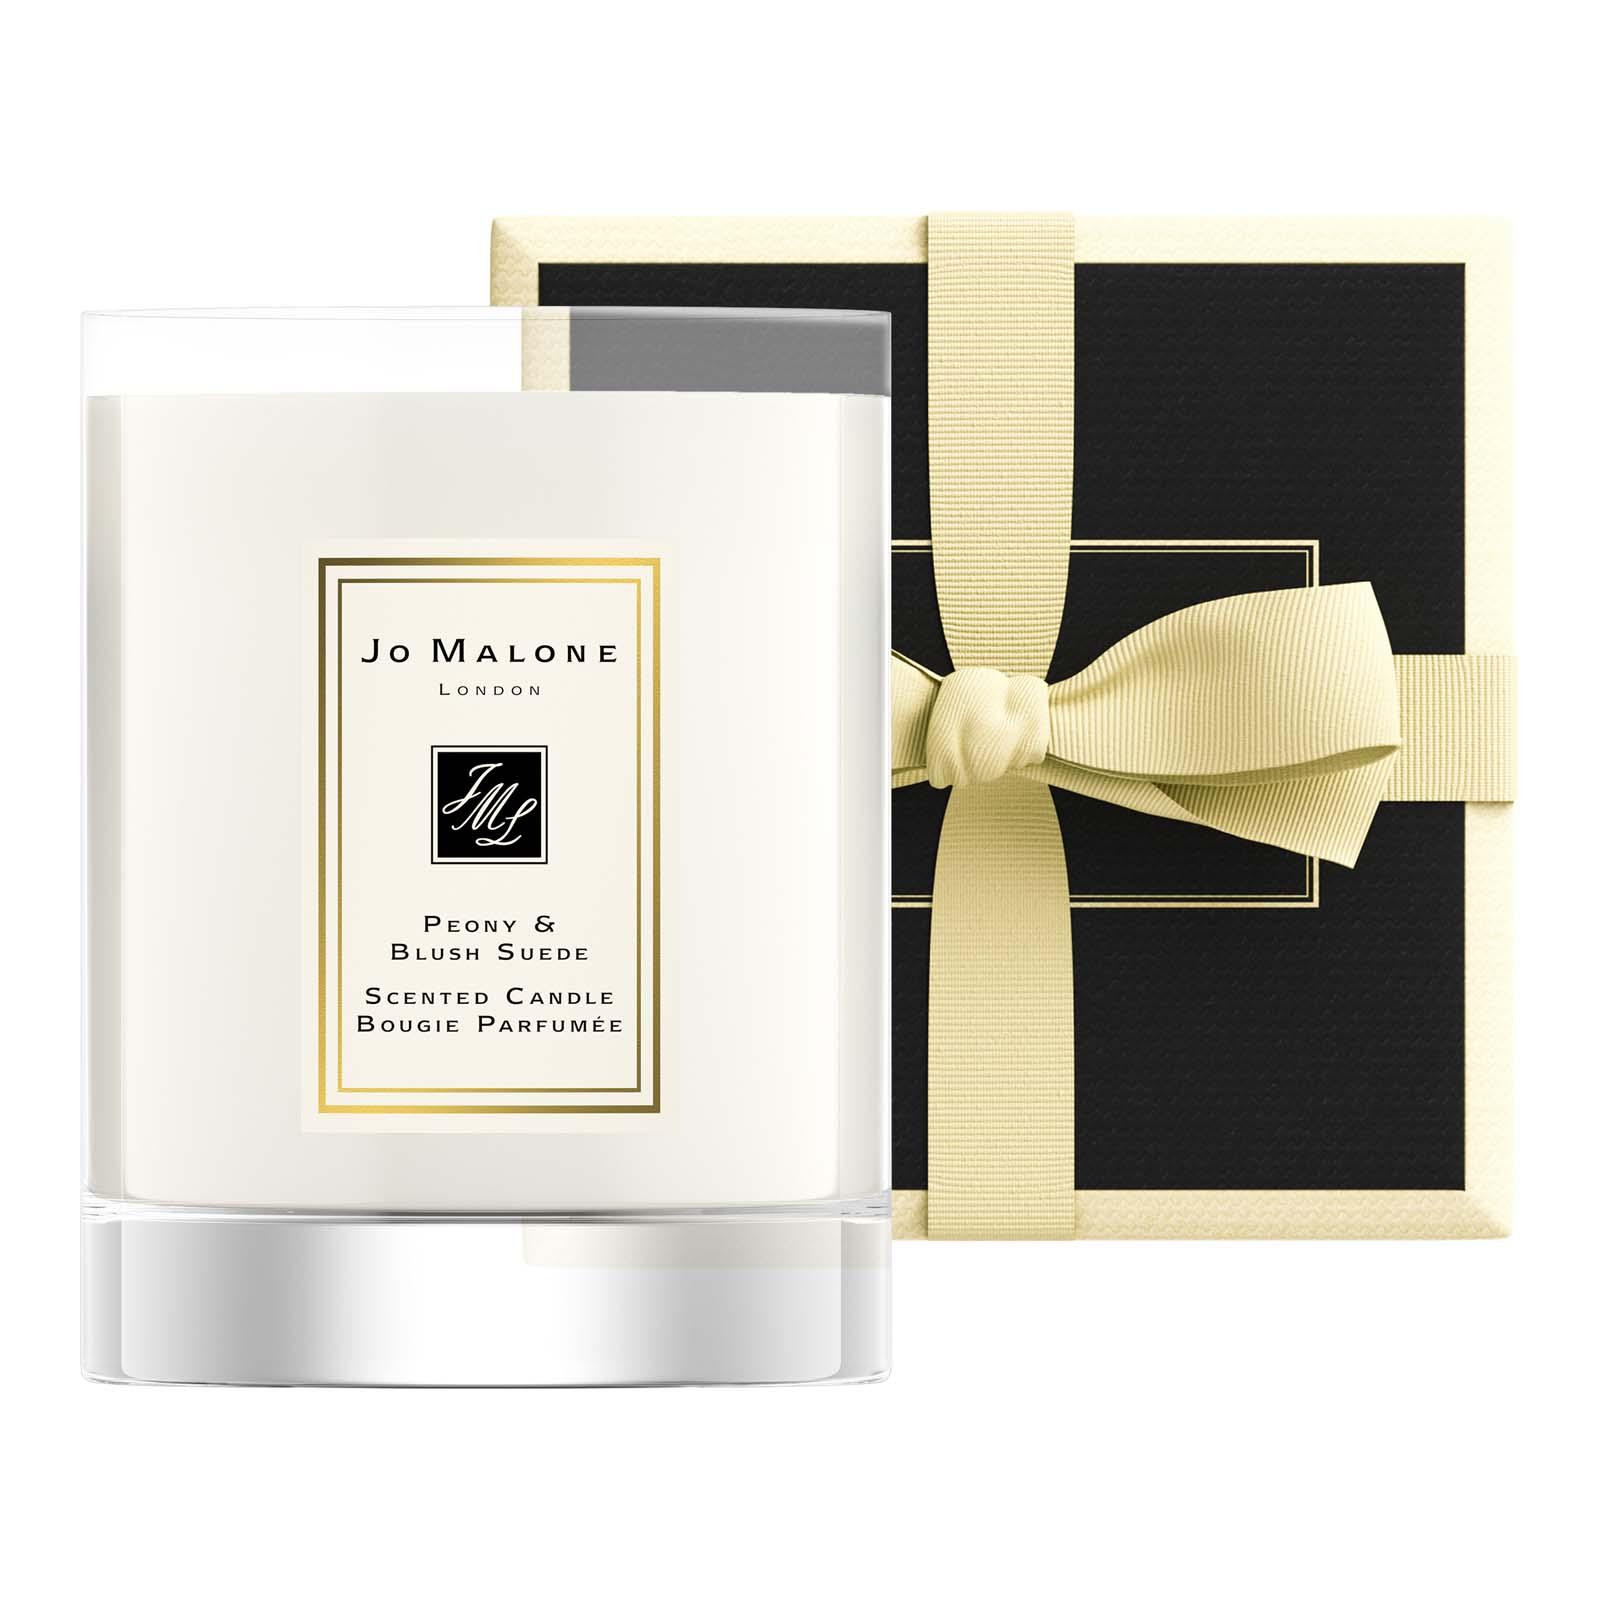 Jo Malone London Peony & Blush Suede Travel Candle 60g - Feelunique